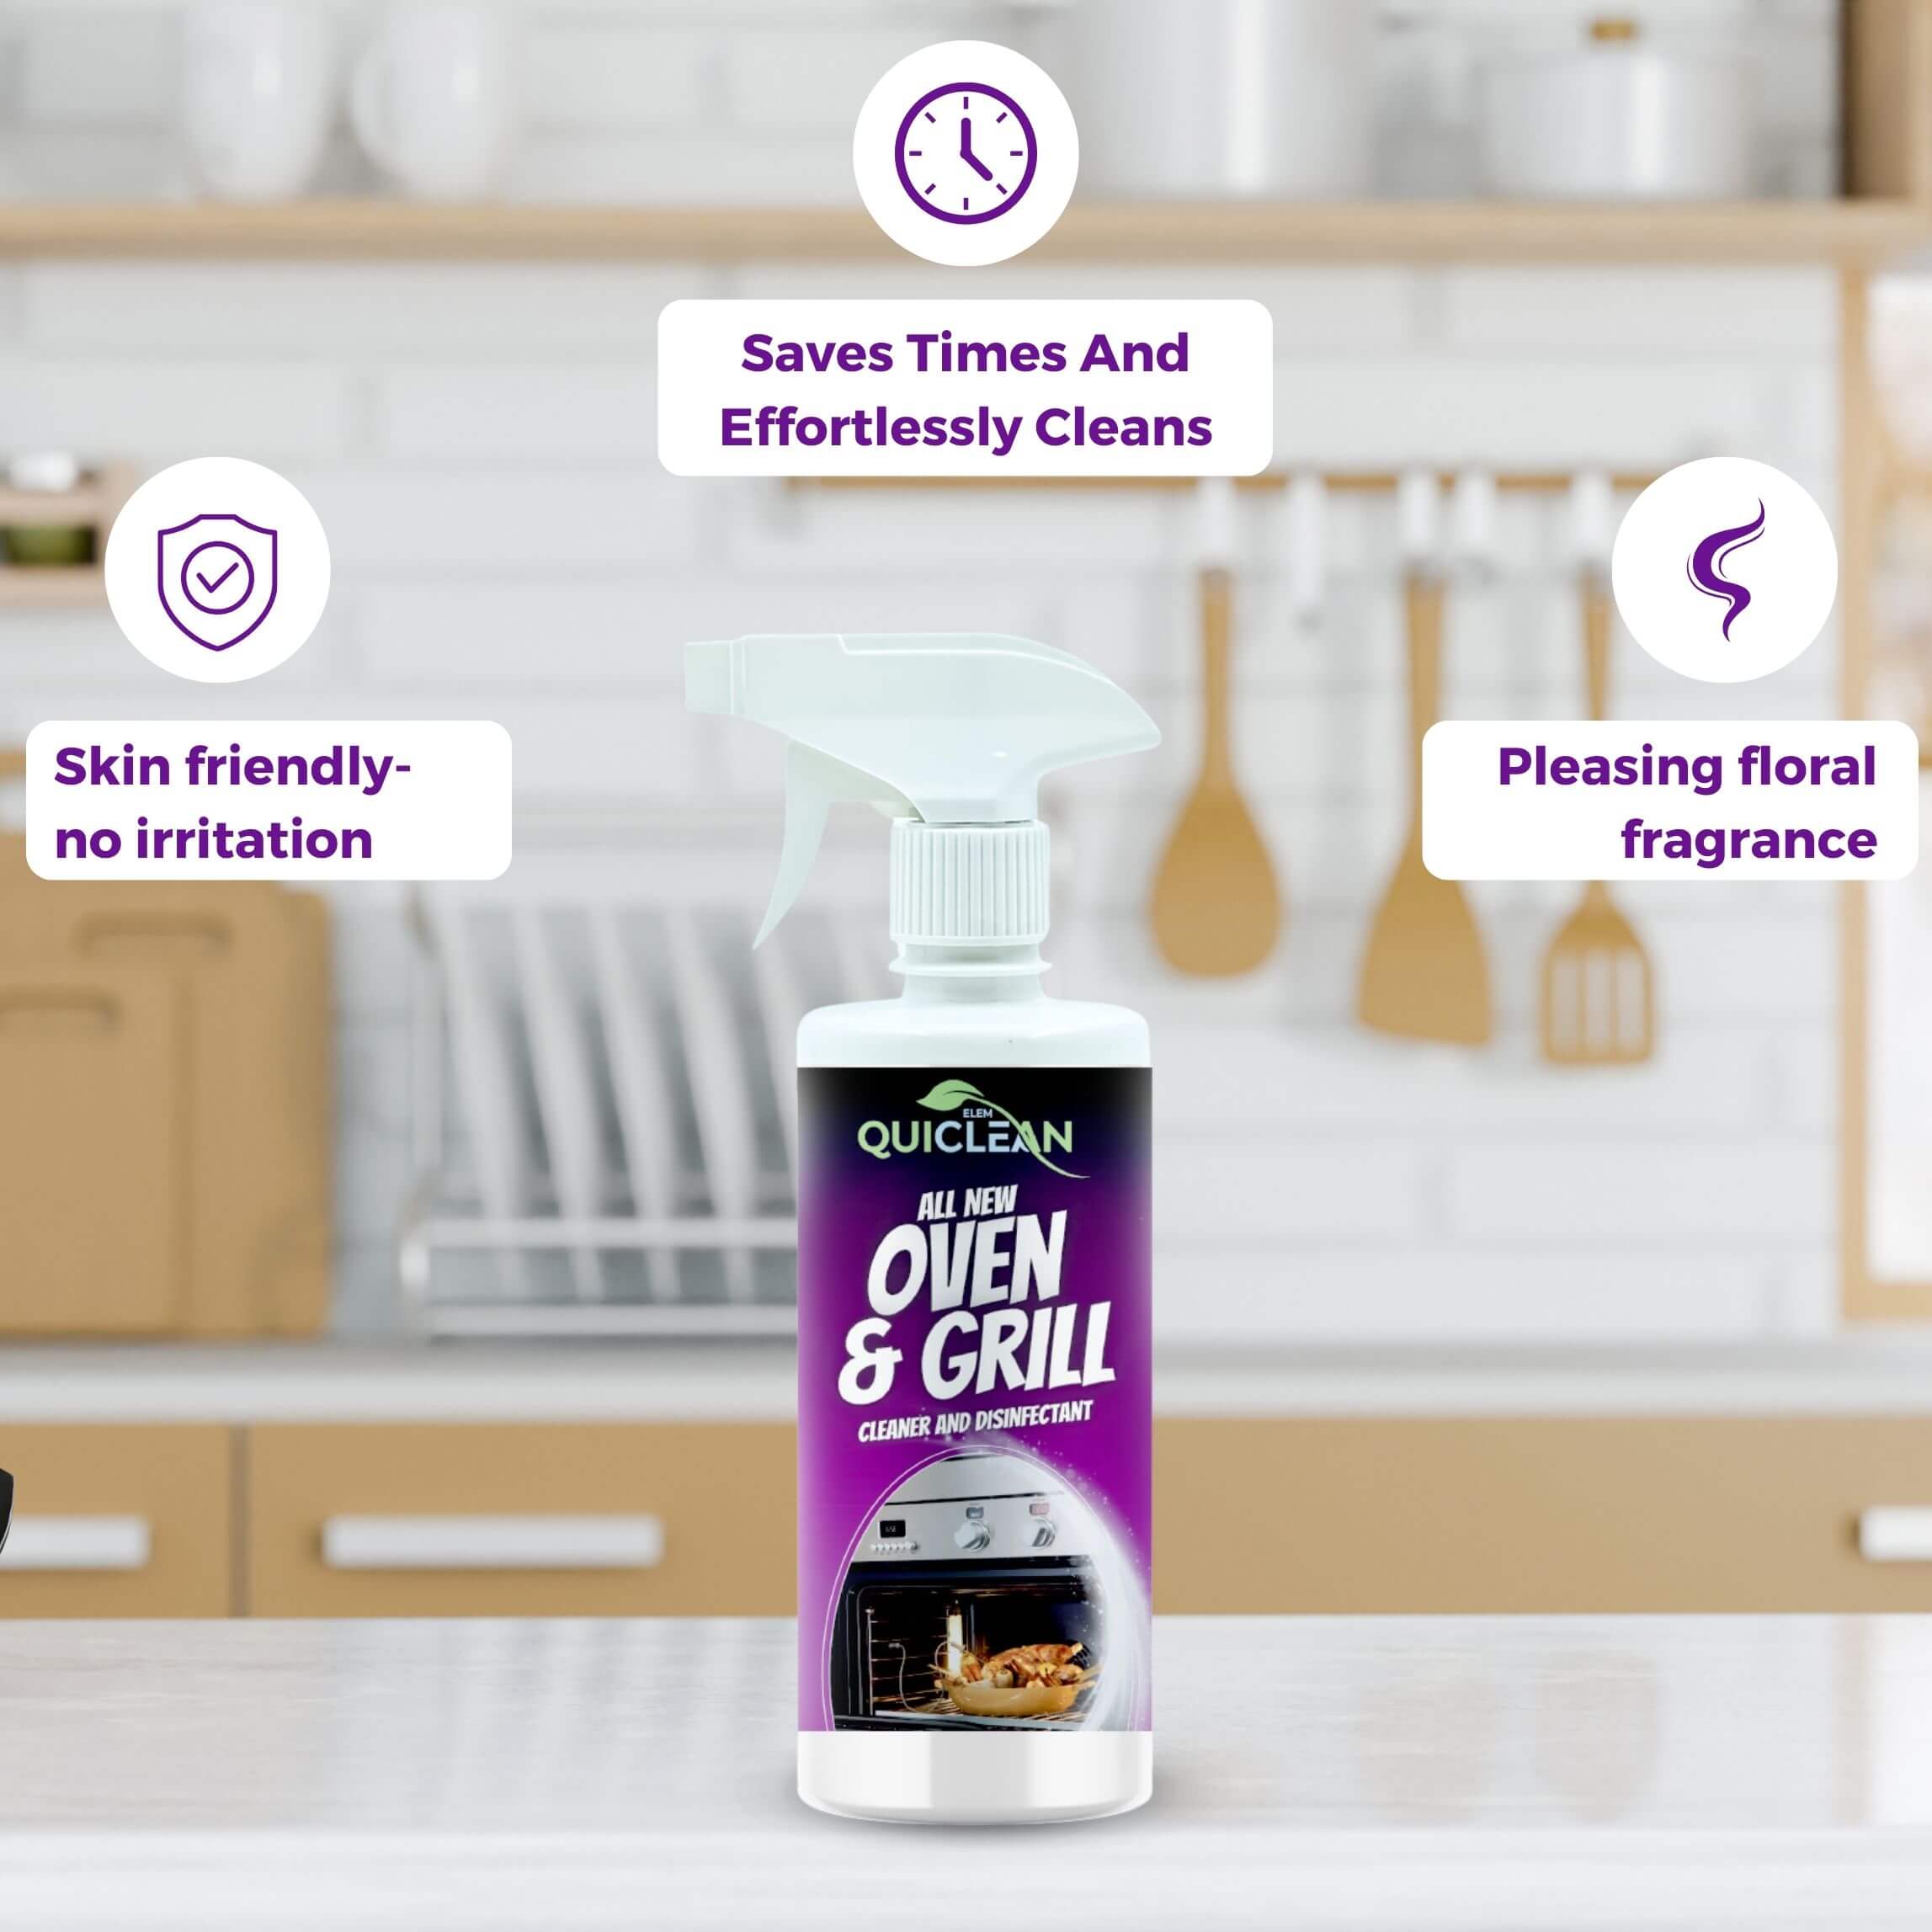 Quiclean™ All new Oven & grill cleaner and disinfectant spray - 500 ml